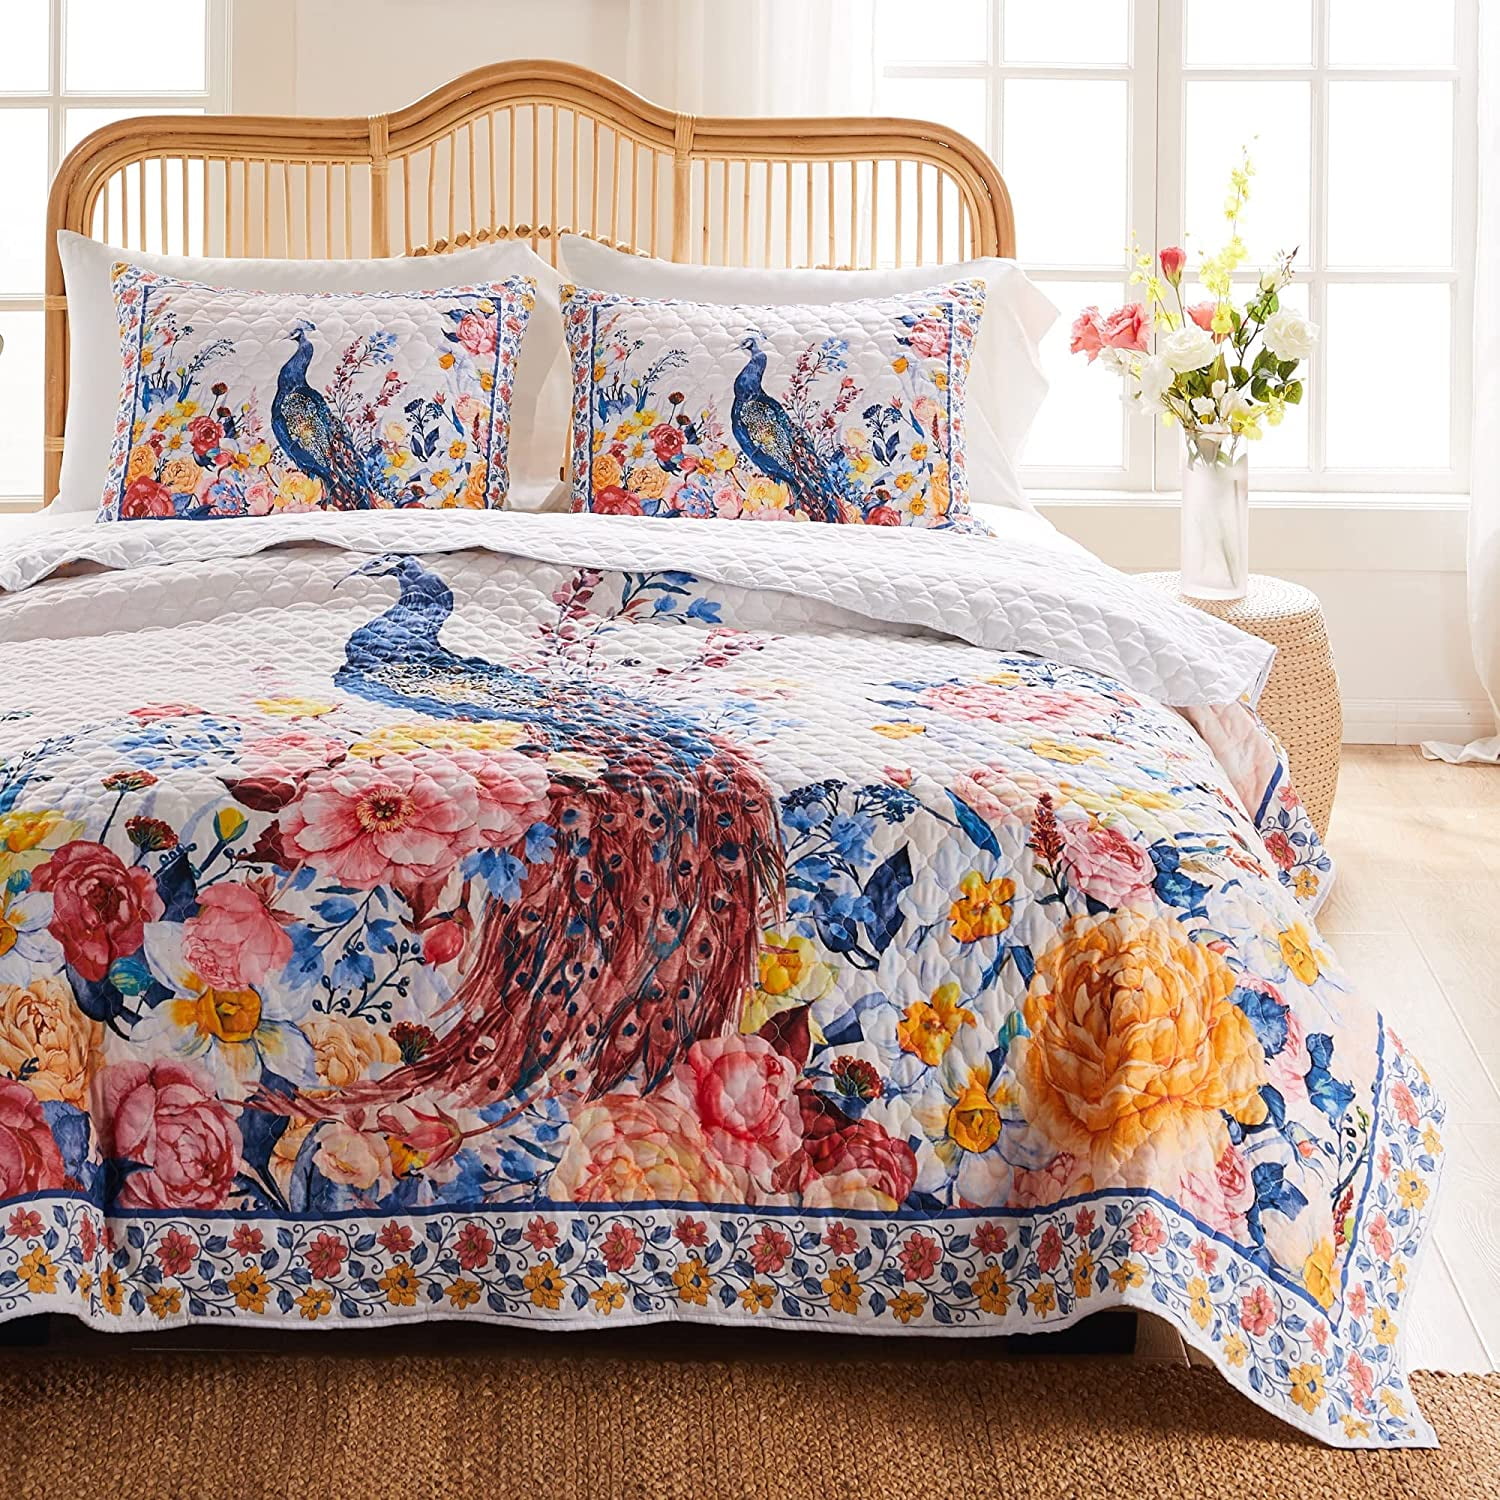 Details about    Handmade Kantha Quilt Floral Print Twin Size bedspread,bed cover Kantha throw 